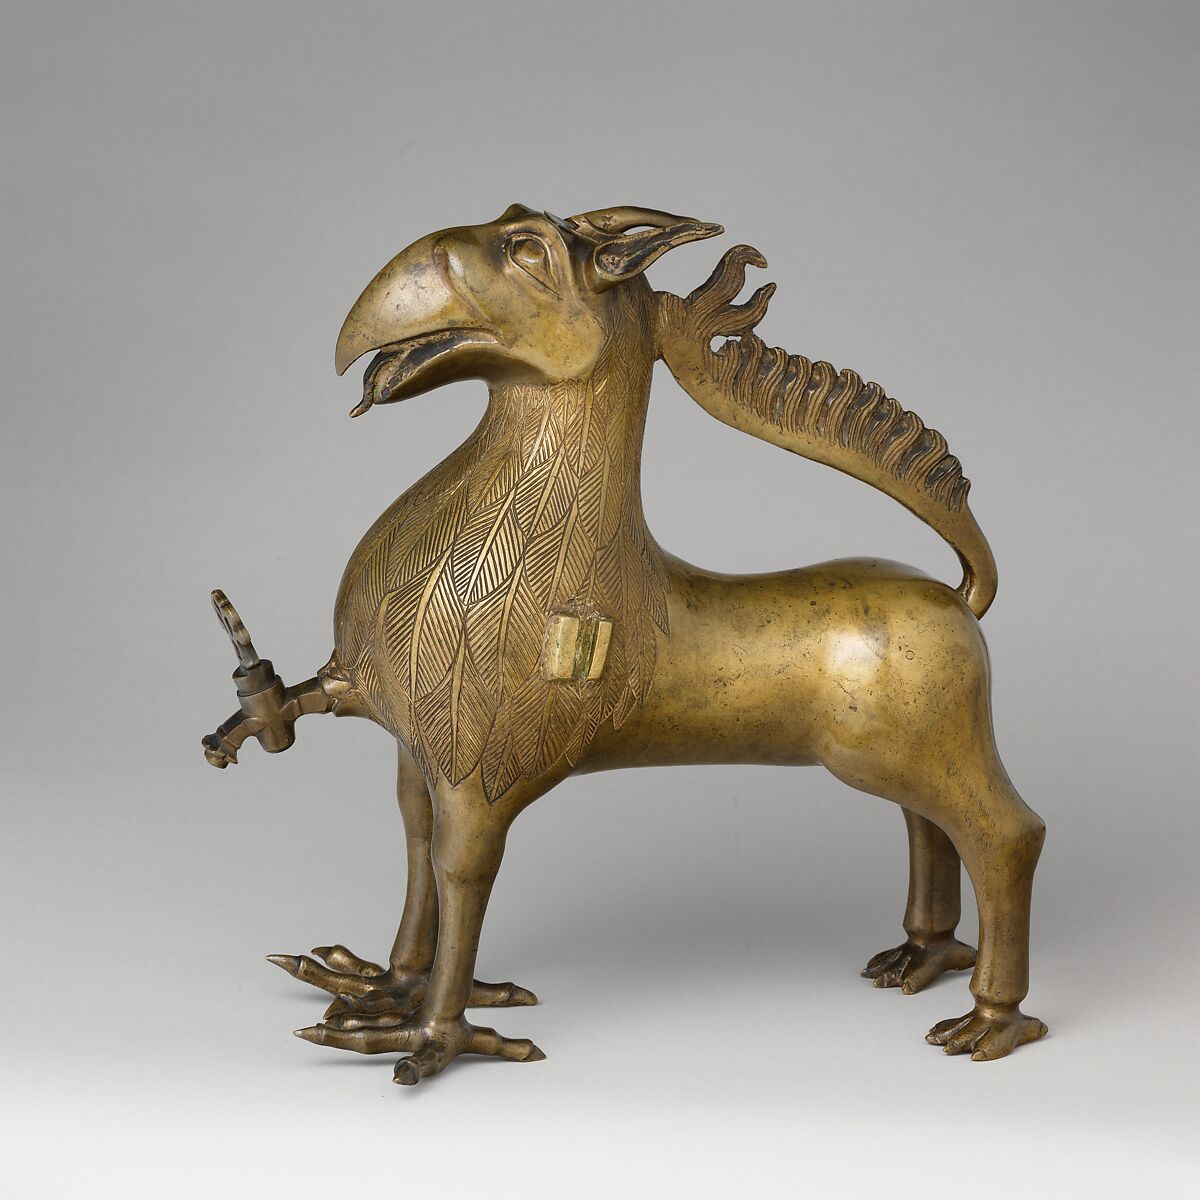 Aquamanile in the Form of a Griffin, Bronze; Ternary copper alloy with a very high content of zinc (approx. 74%
copper, approx. 22% zinc, approx. 2% lead) with natural patina, hollow cast., German, Nuremberg 